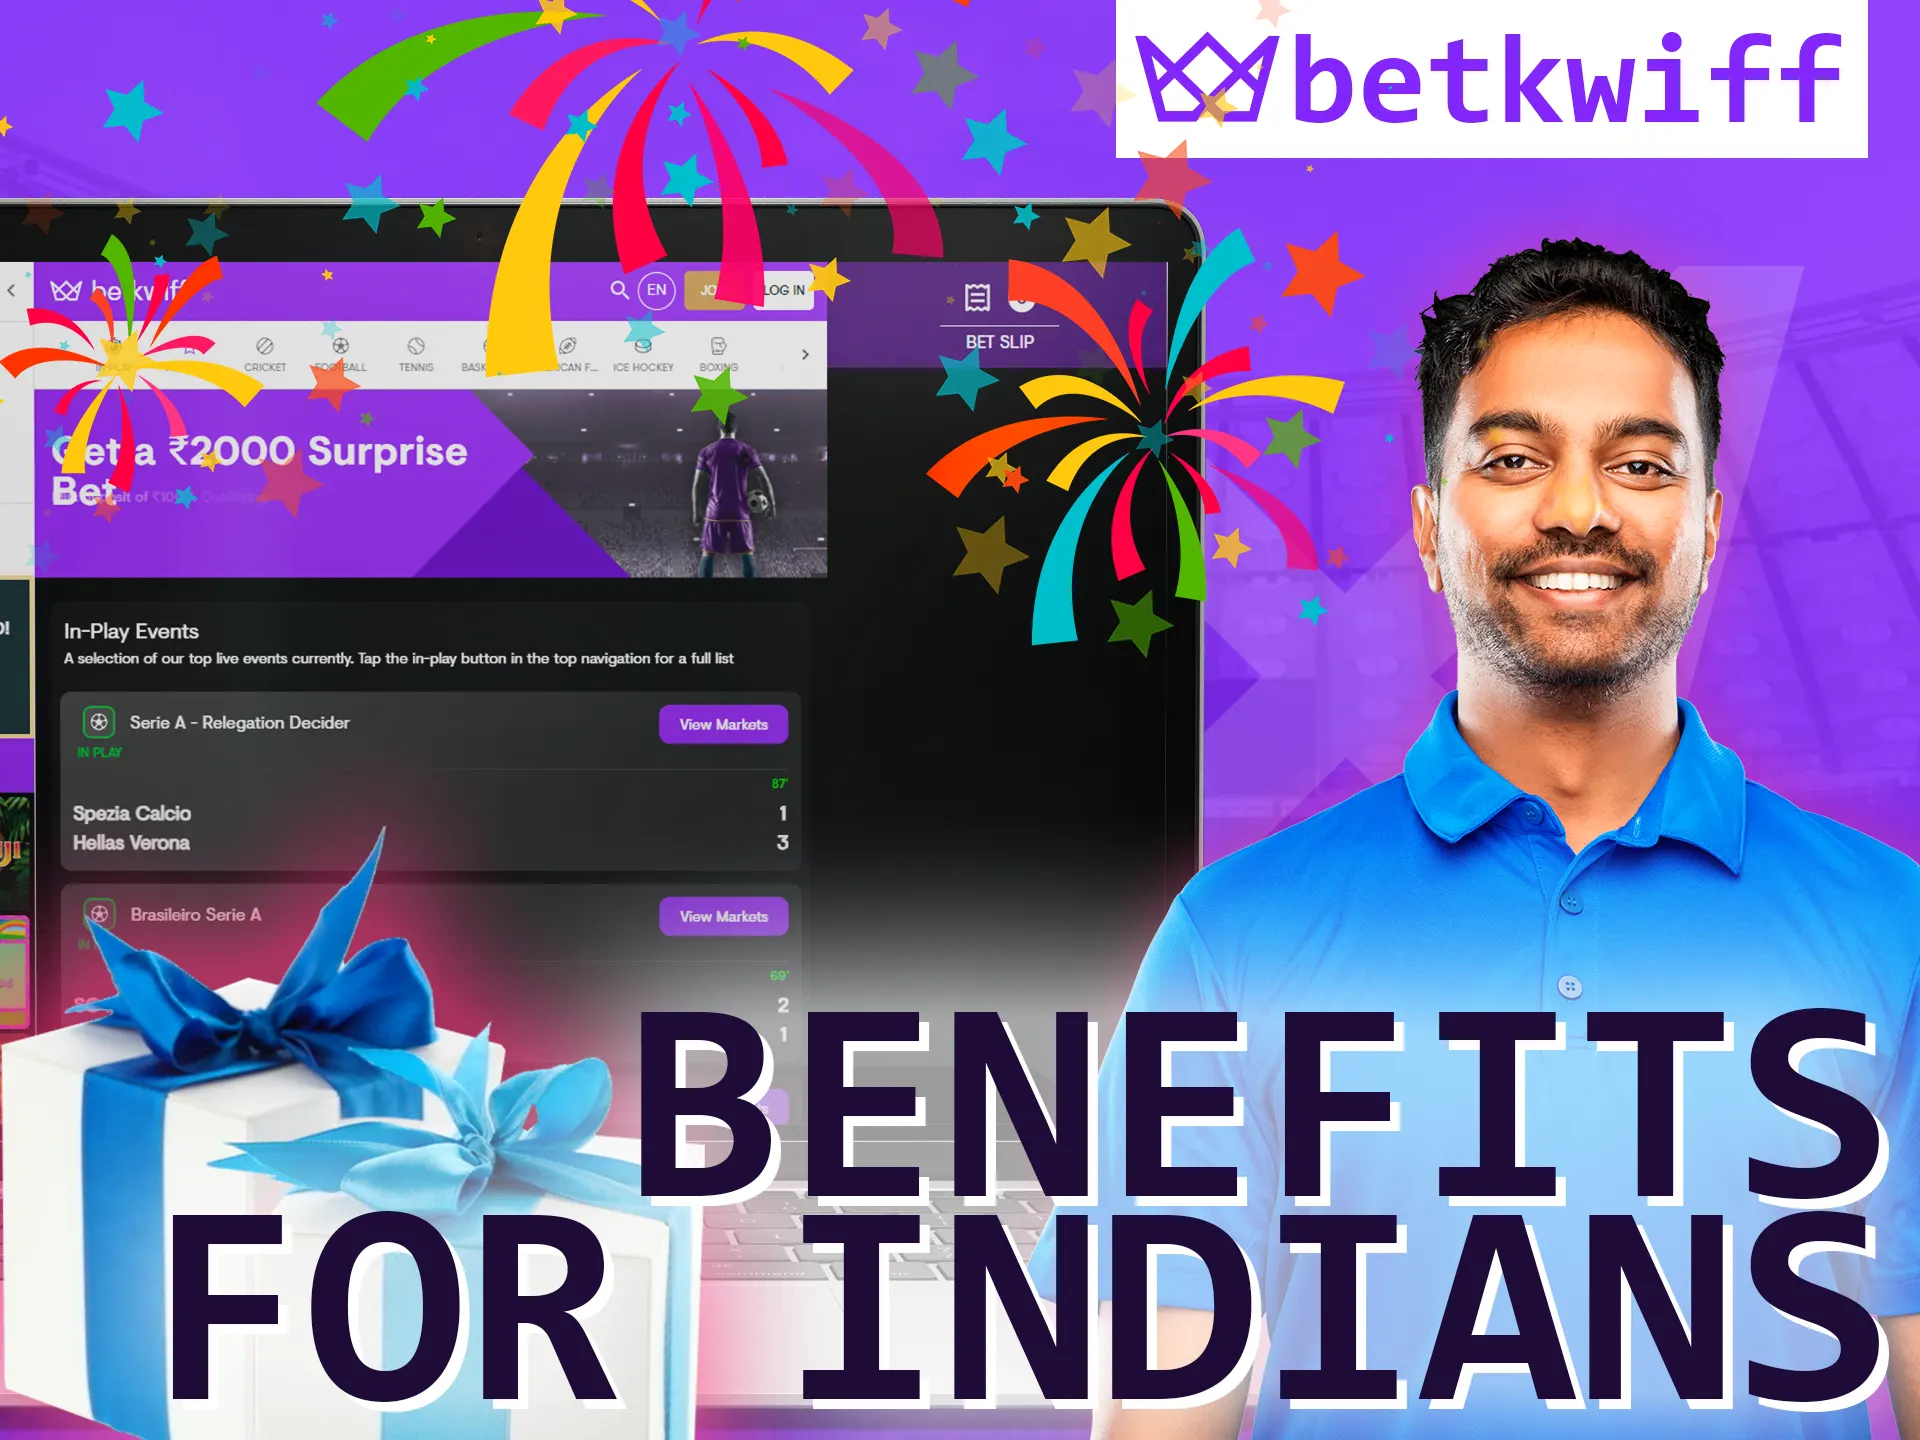 Betkwiff offers many bonuses and benefits to players.